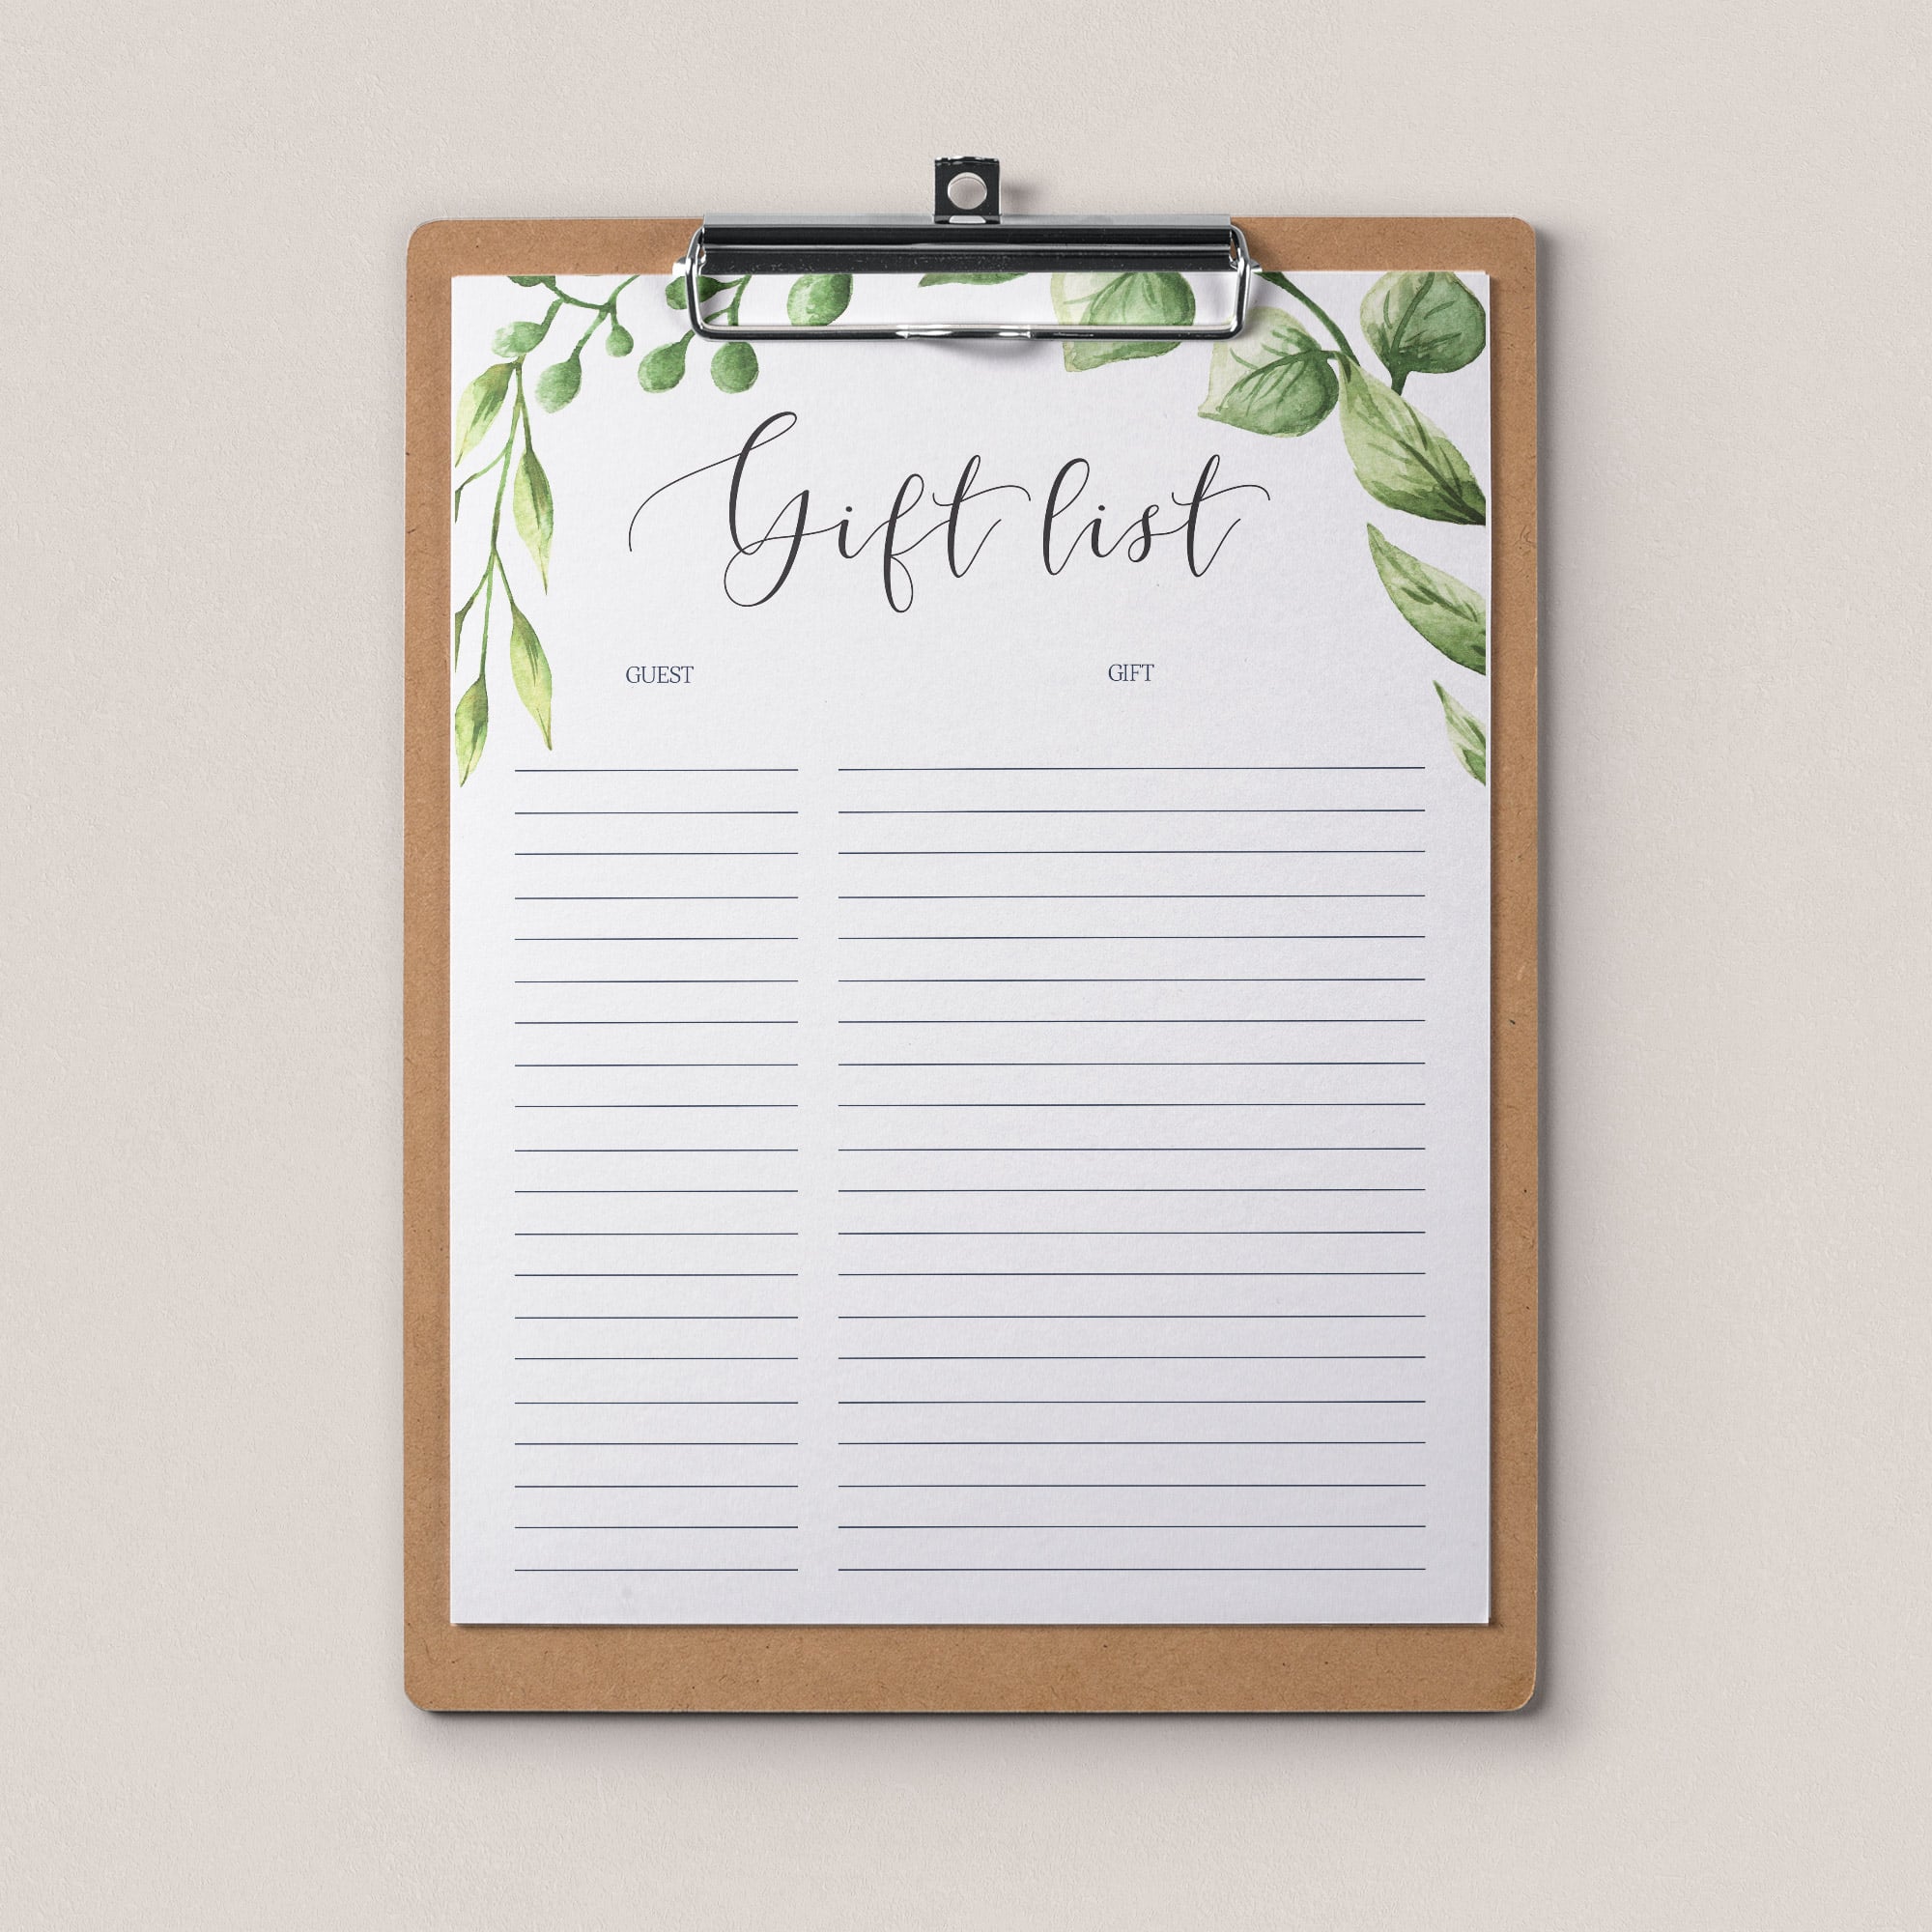 Gift and guest log printable files by LittleSizzle